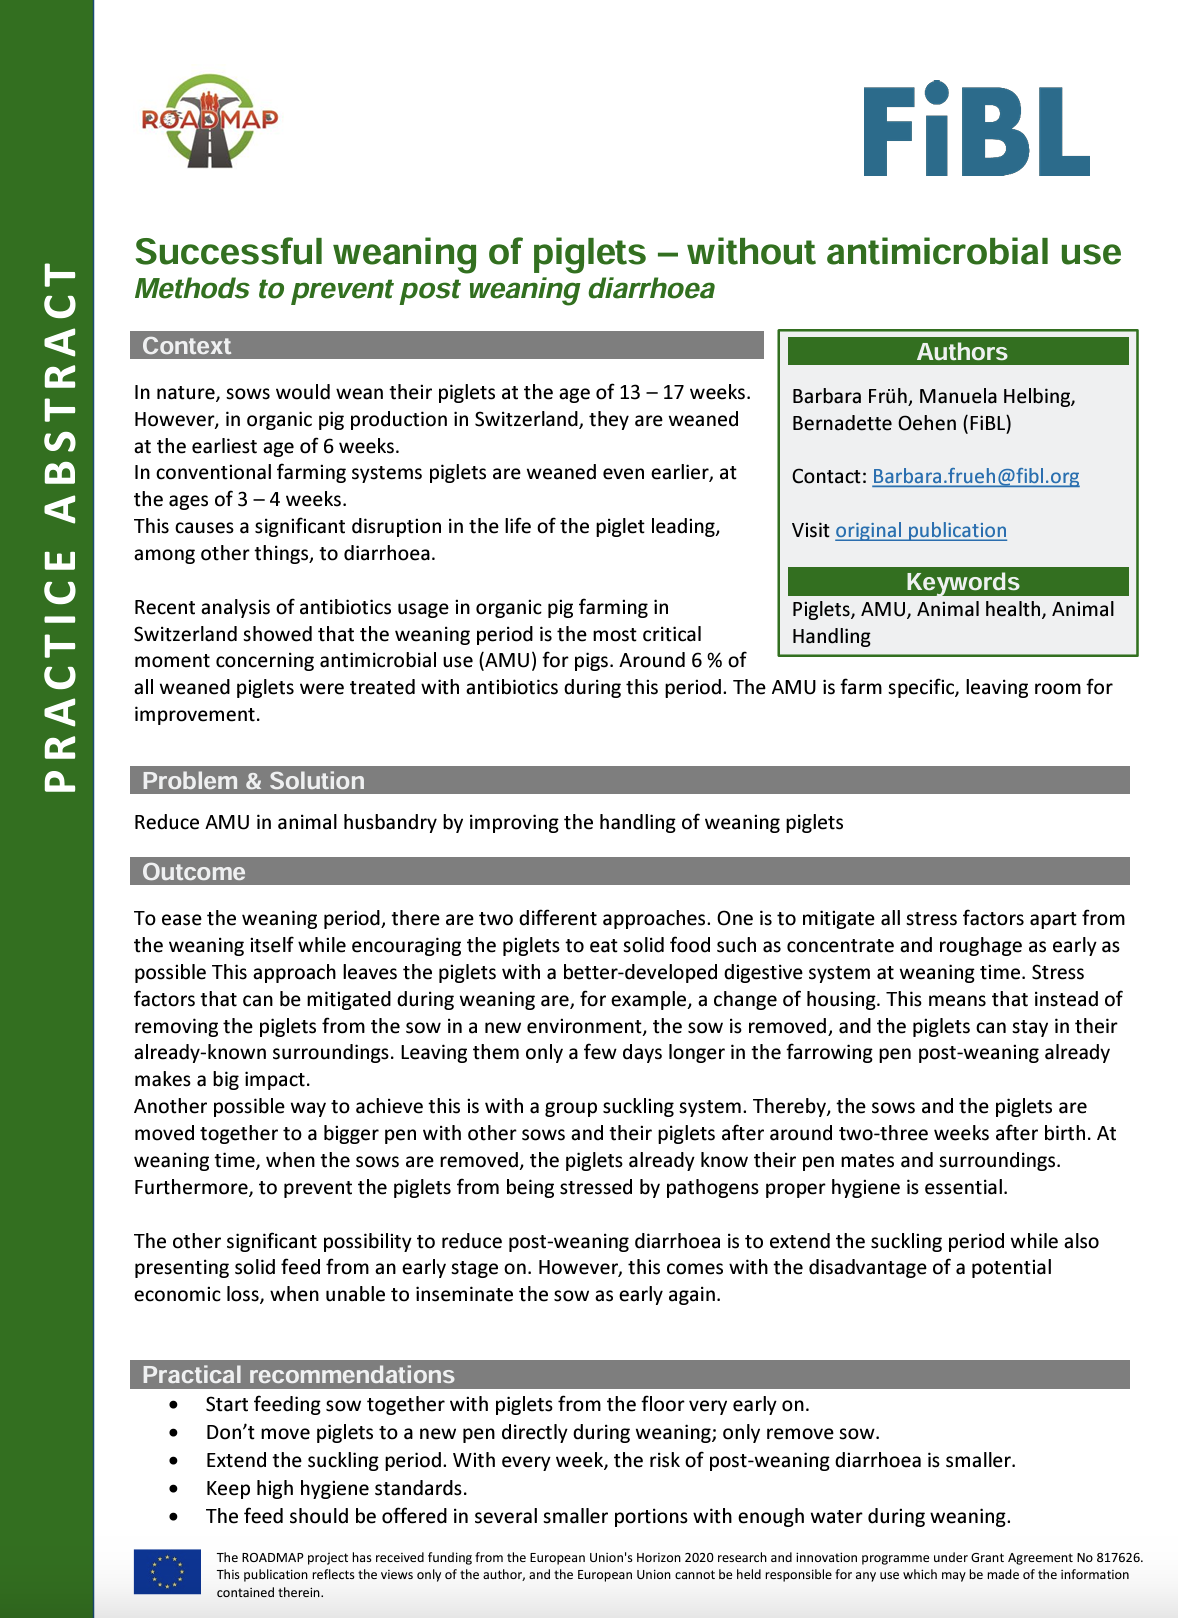 Successful weaning of piglets – without antimicrobial use (ROADMAP practice abstract)